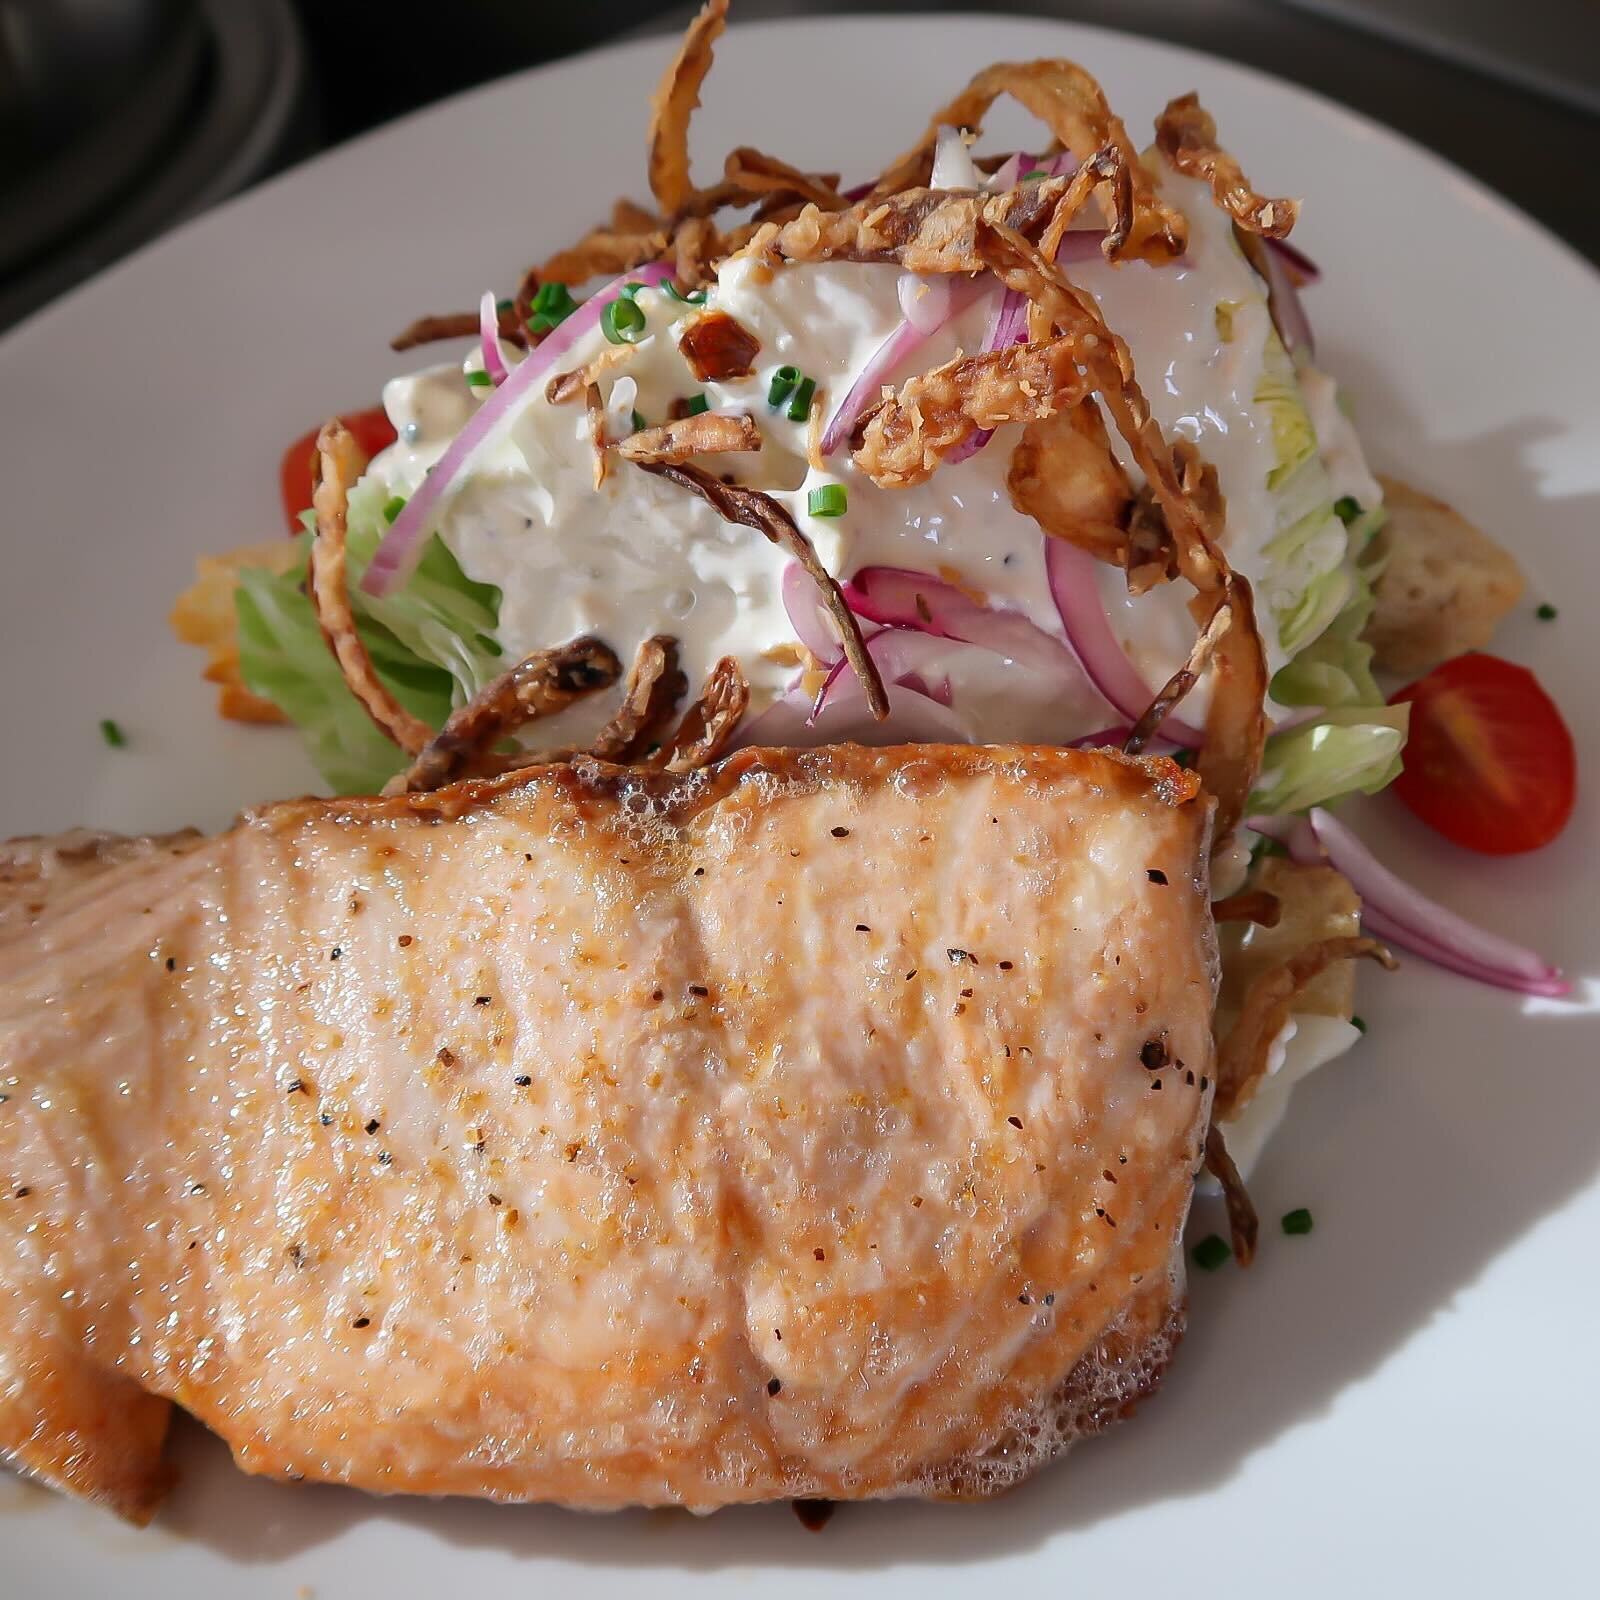 iceberg wedge with grilled salmon
lardons, tomatoes, croutons, creamy blue cheese dressing, chives, red onions &amp; fried shallots

1020 Post Road Darien, CT 06820
203 655 1020

#connecticuteats #203local #connecticutfoodie #cteats #foodie